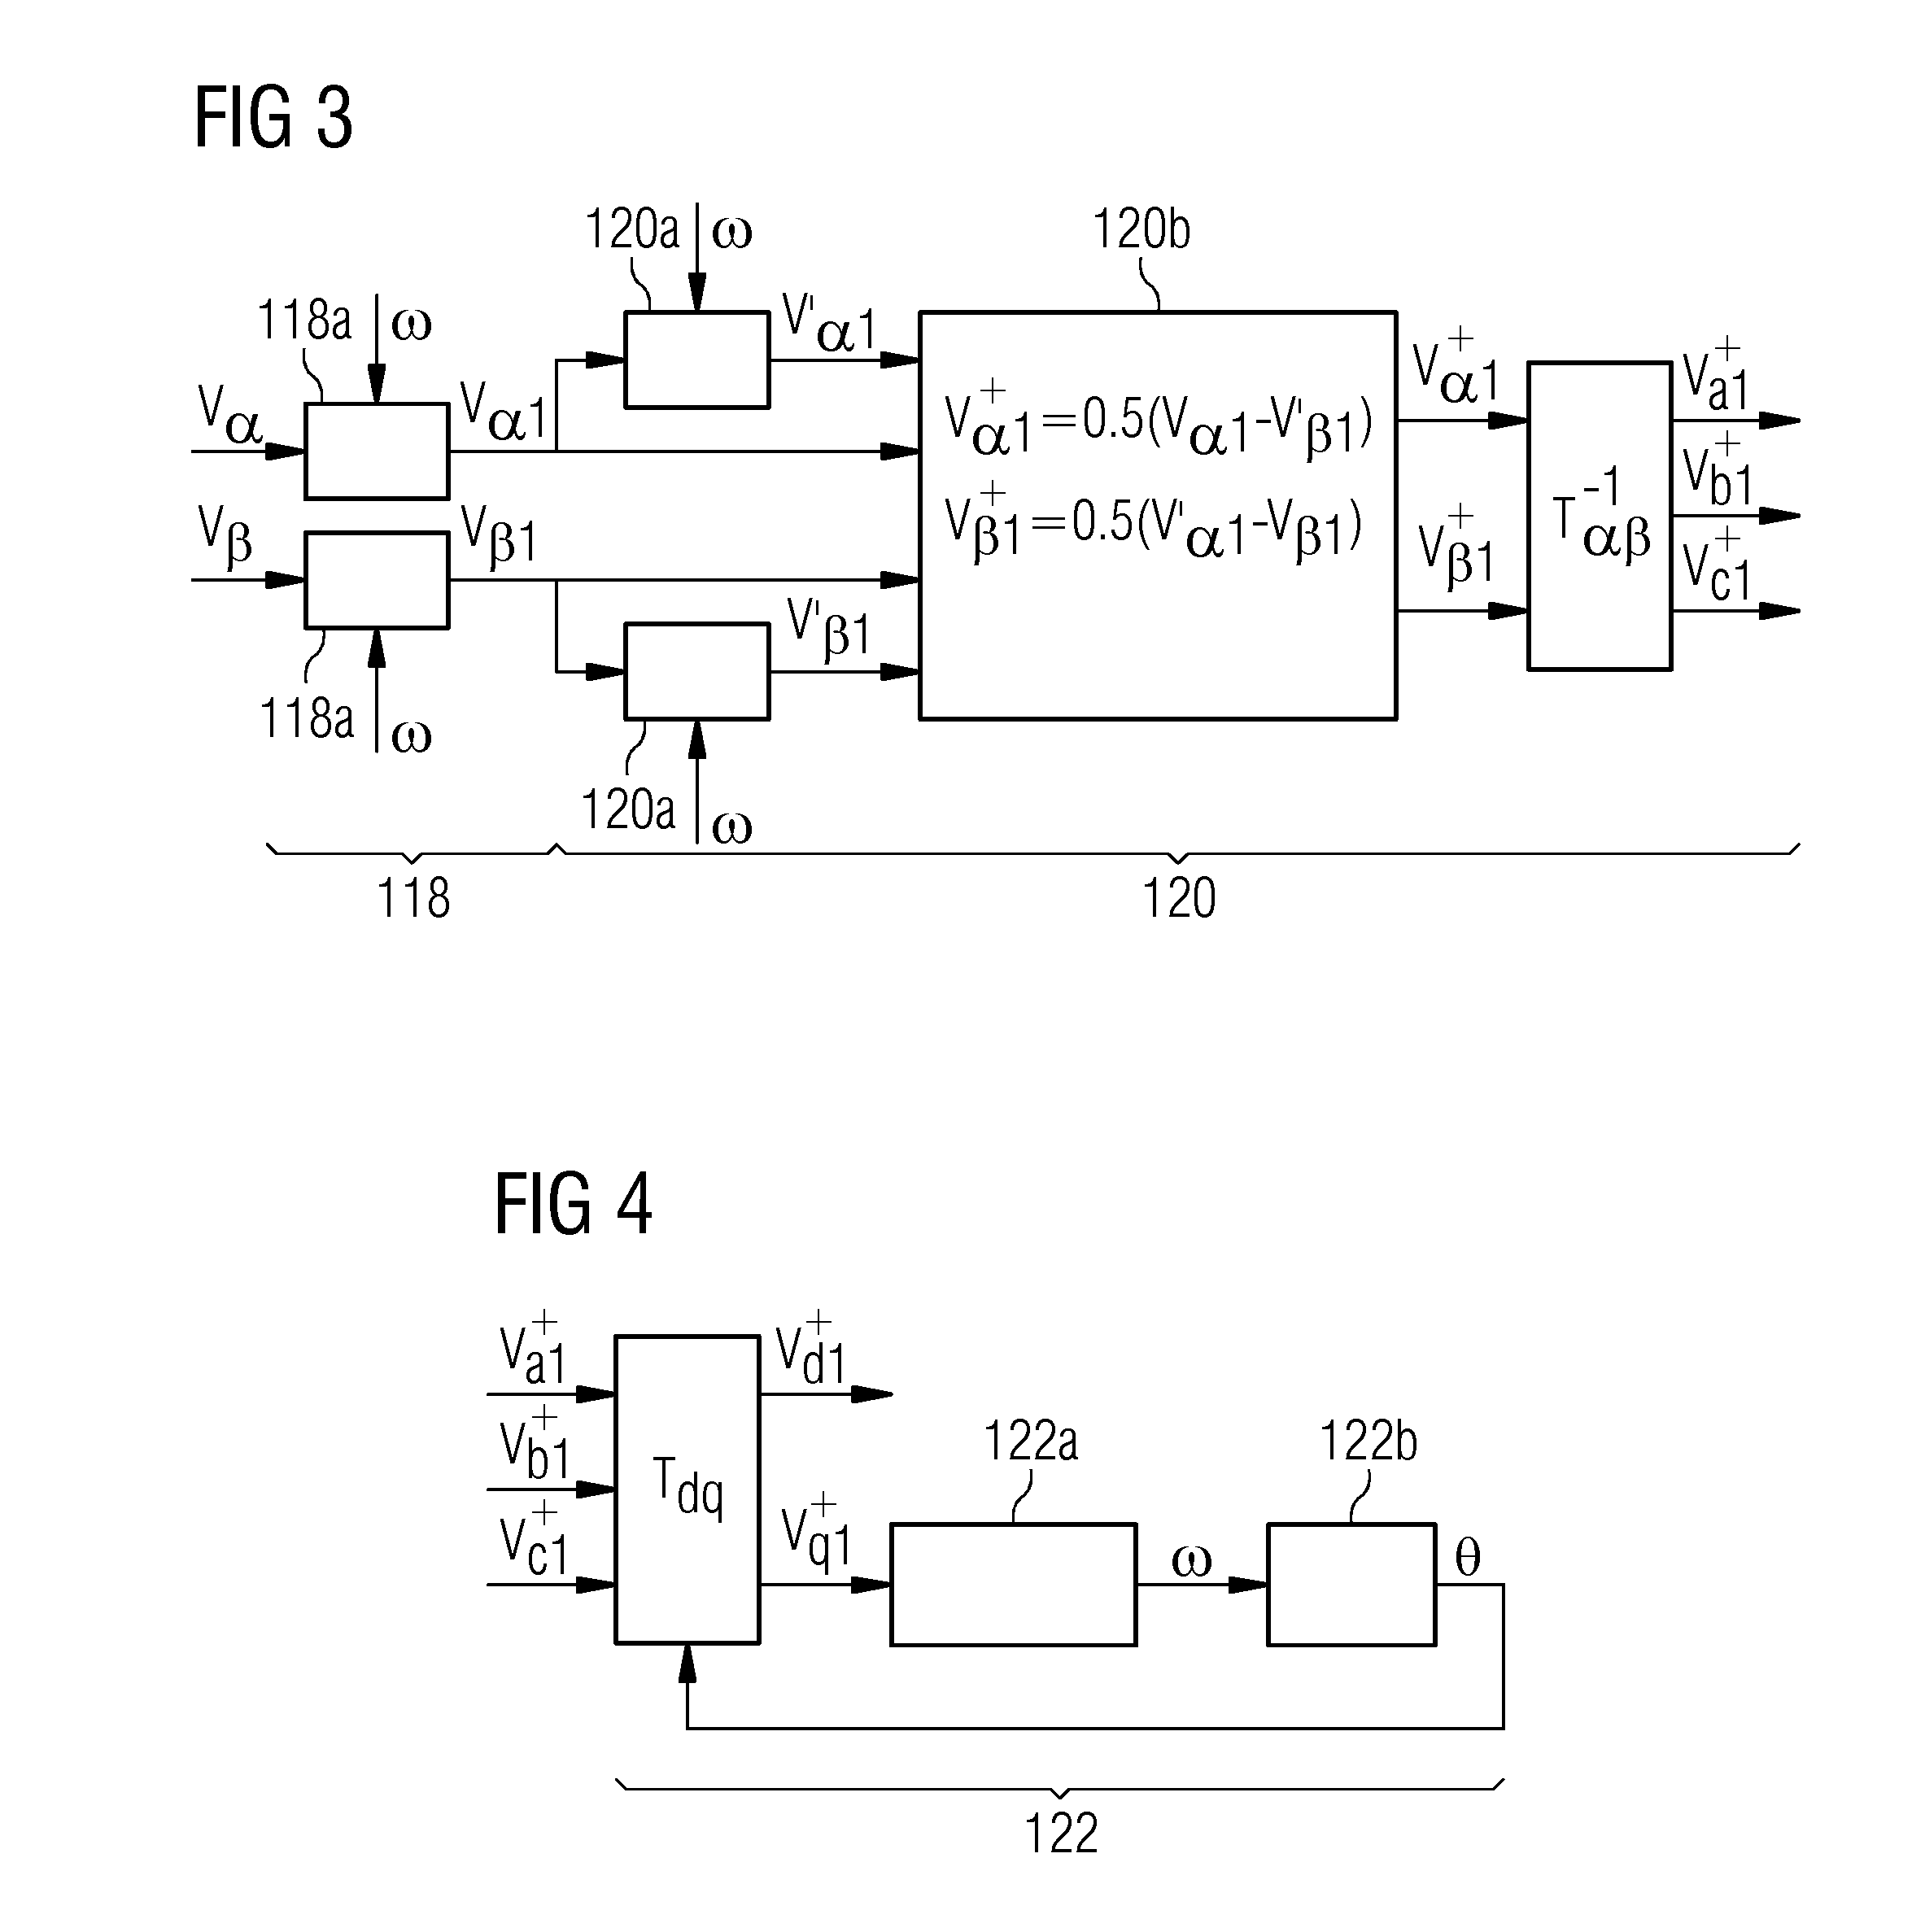 Determining a phase and a frequency of an electric quantity of an operating electrical device